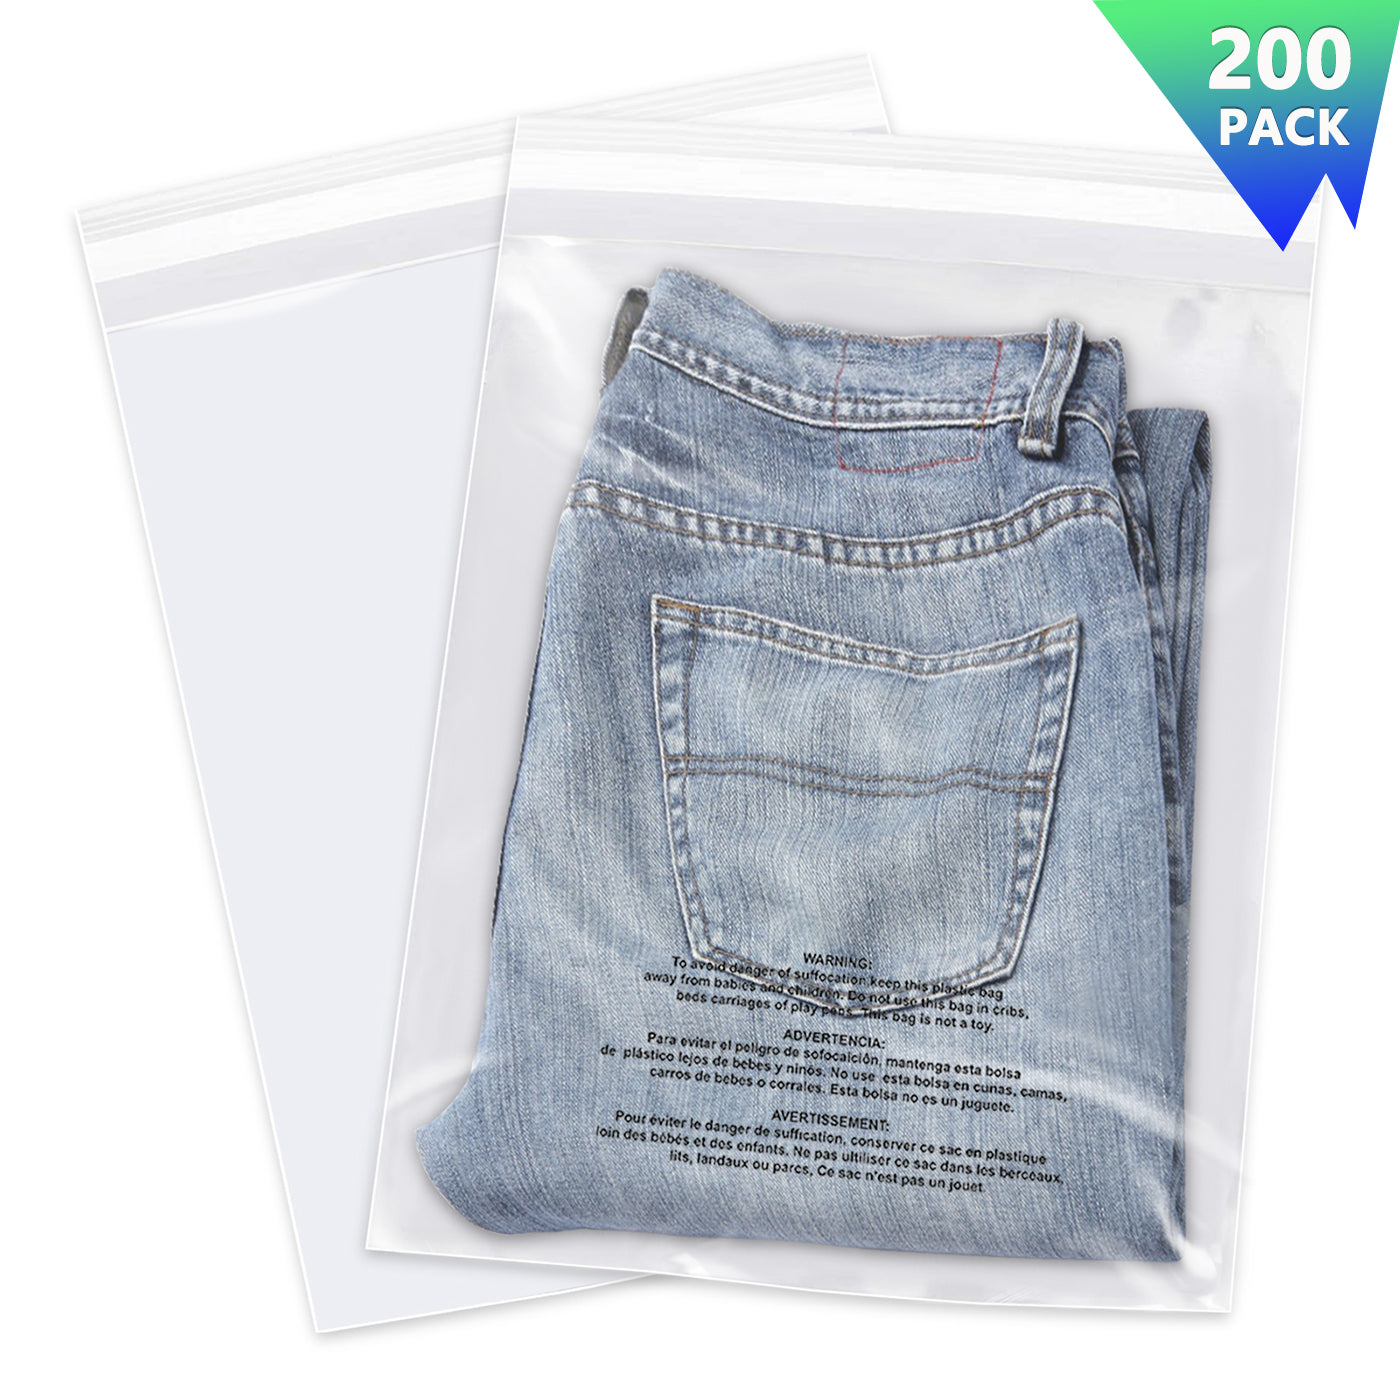 iMailer 10" x 13" Self Seal 1.6 Mil Clear Plastic Poly Bags with Suffocation Warning